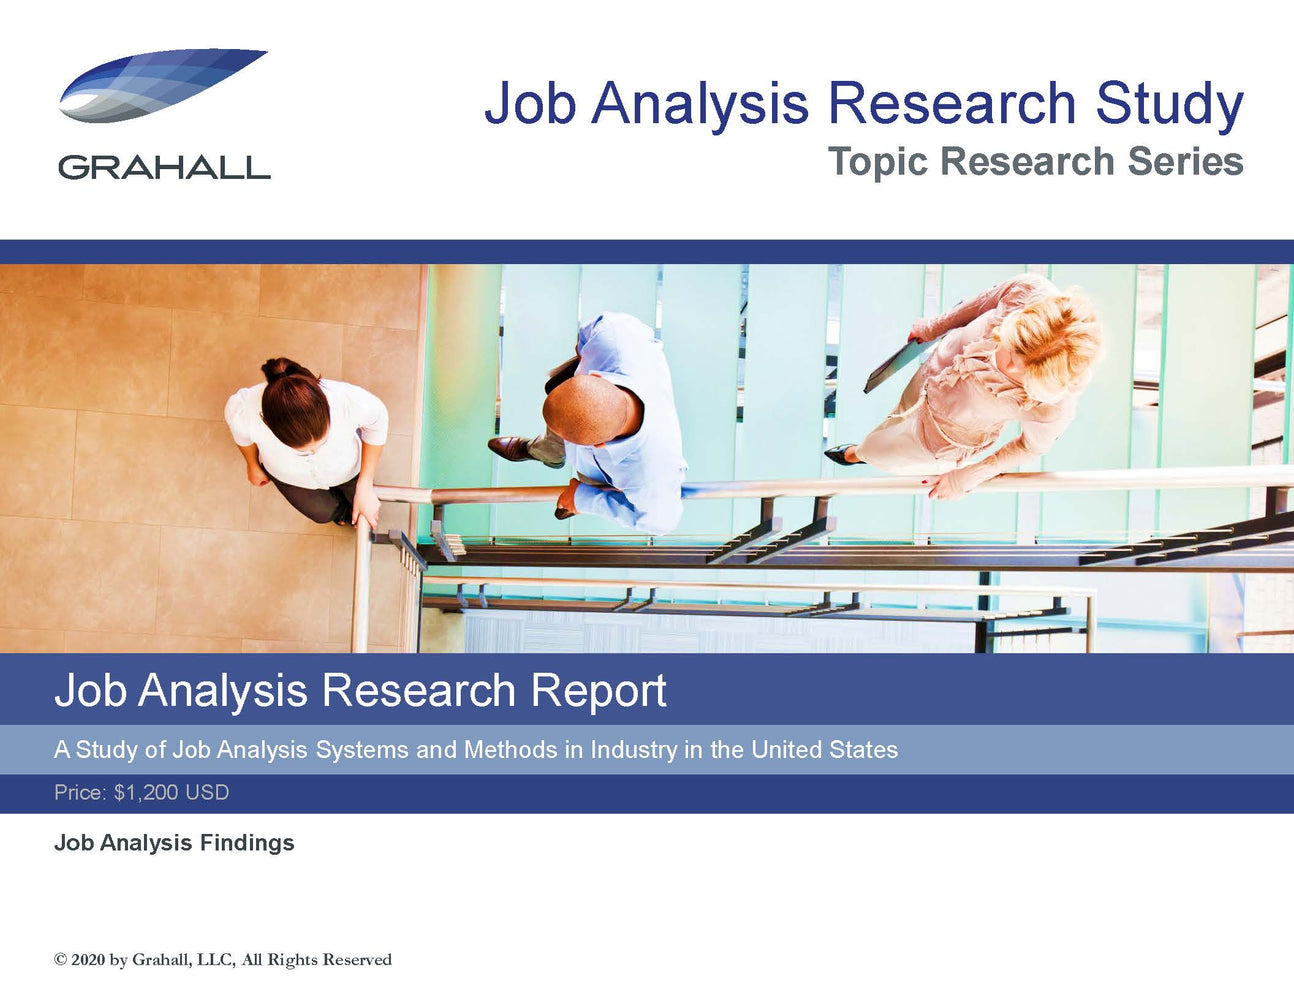 Job Analysis Research Report: A Study of Job Analysis Systems and Methods in the United States